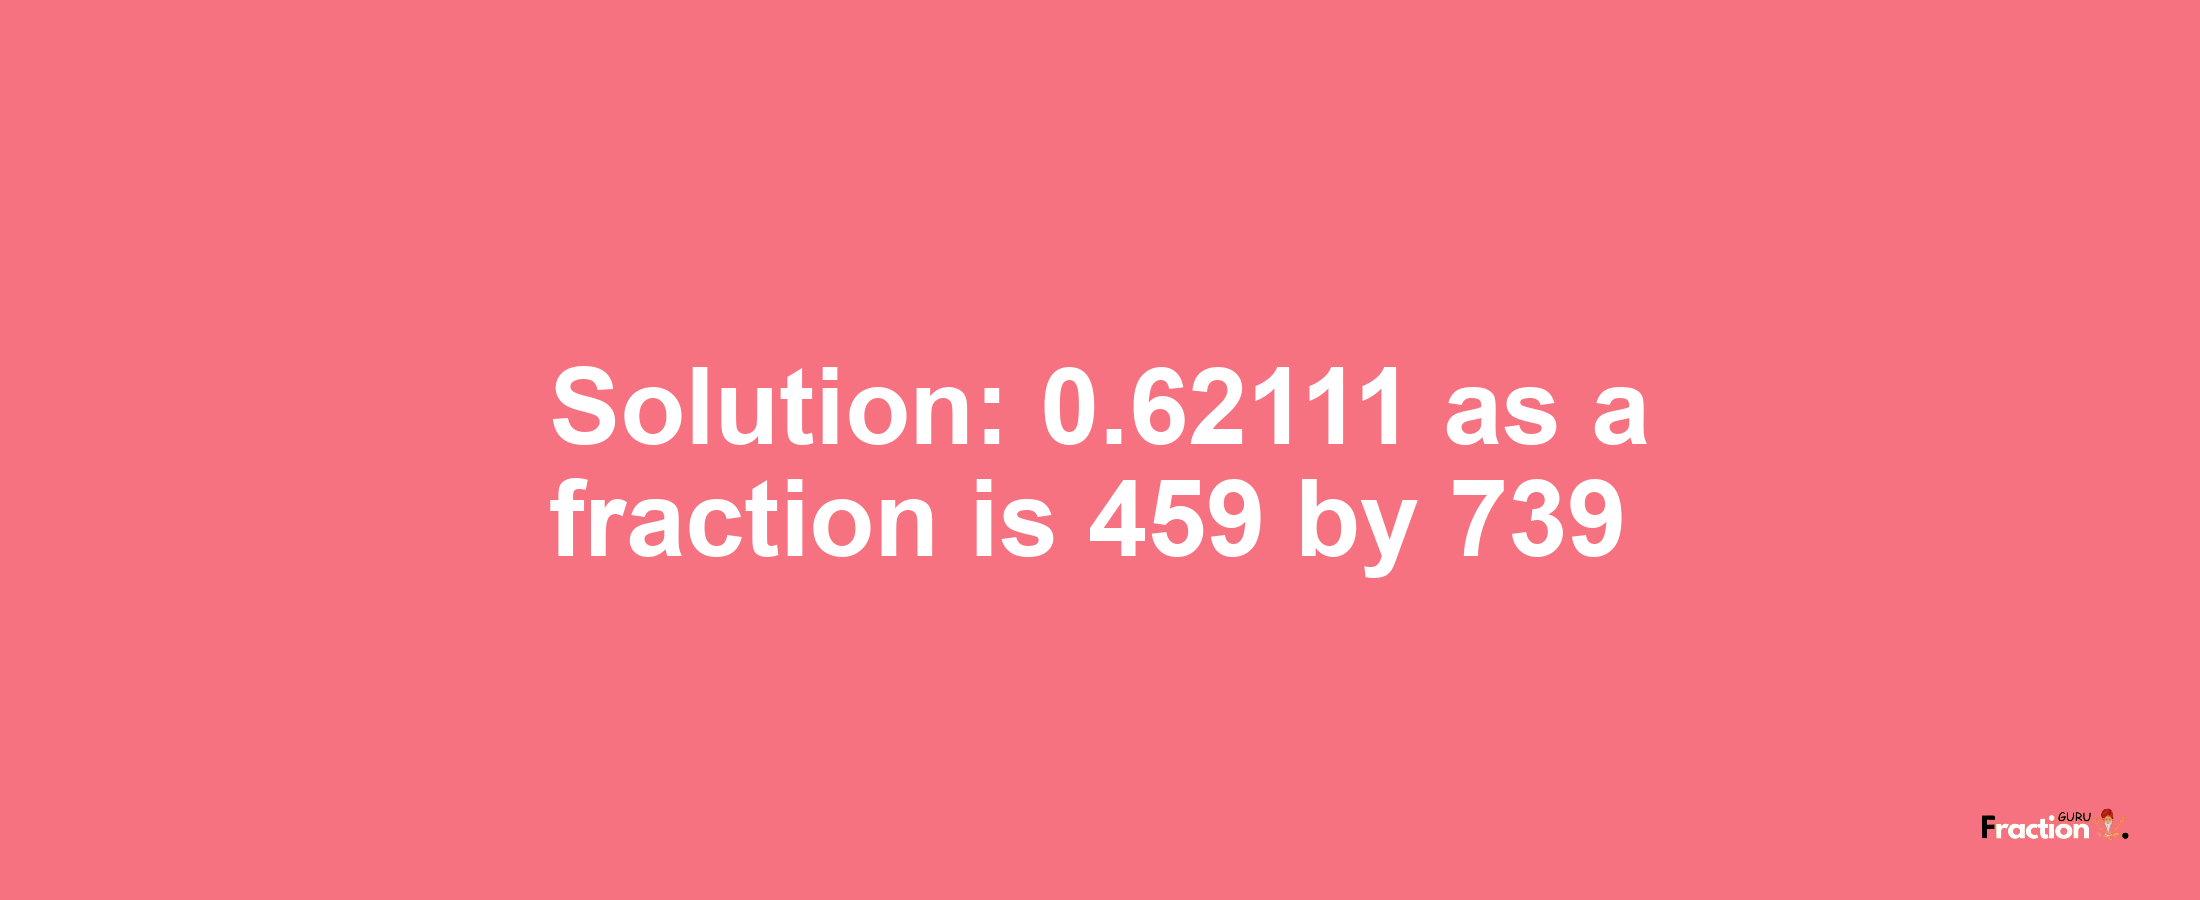 Solution:0.62111 as a fraction is 459/739